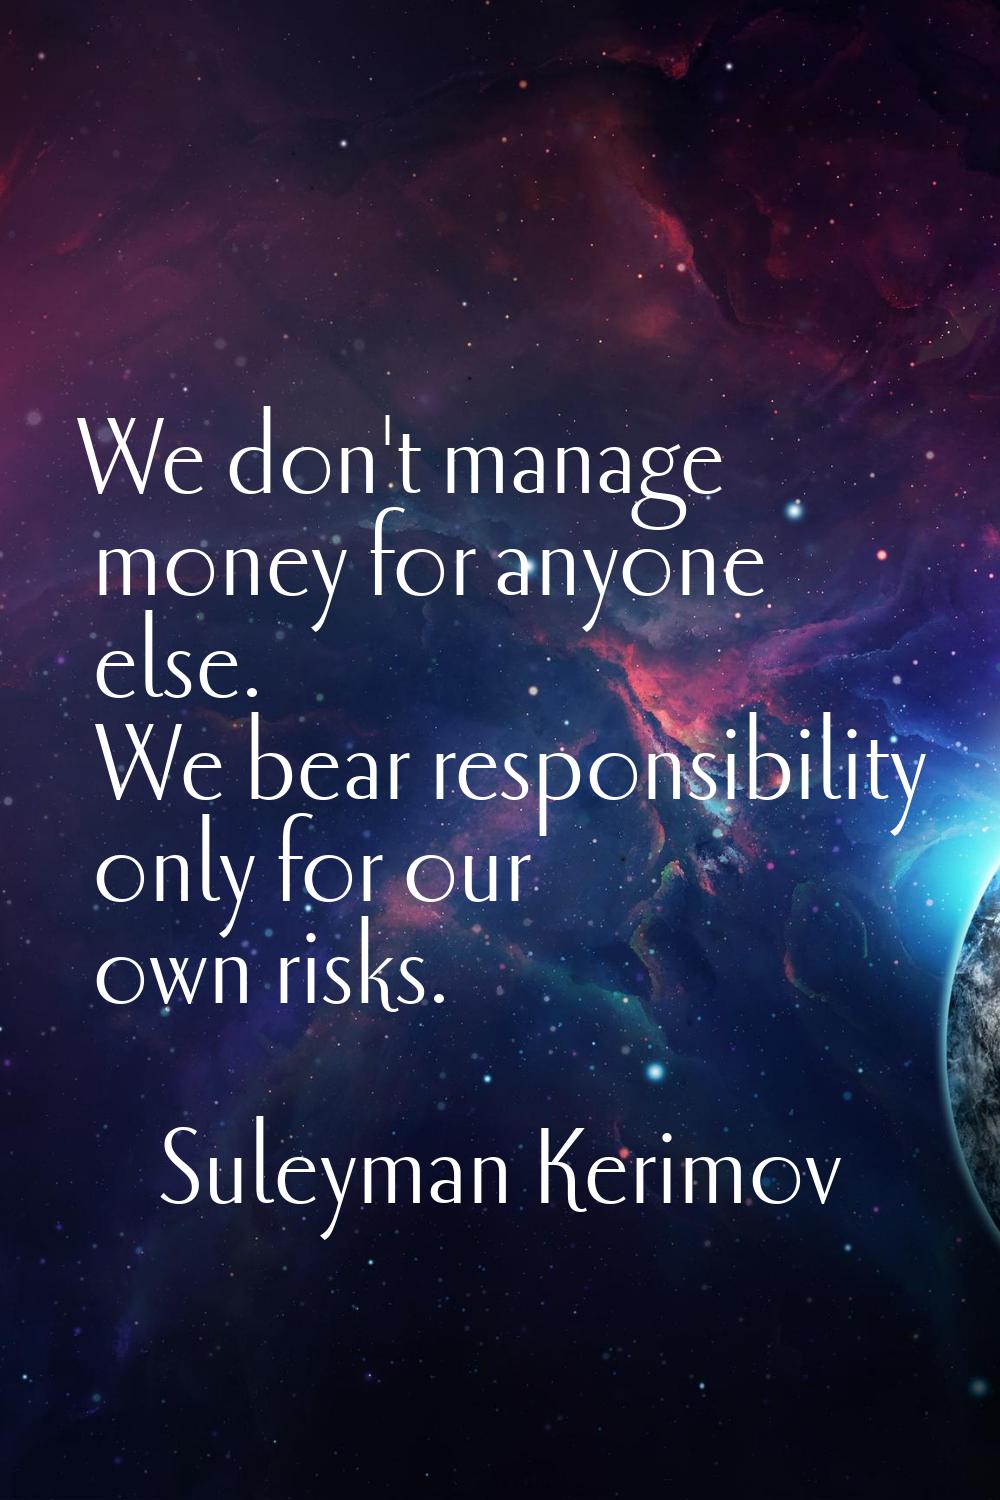 We don't manage money for anyone else. We bear responsibility only for our own risks.